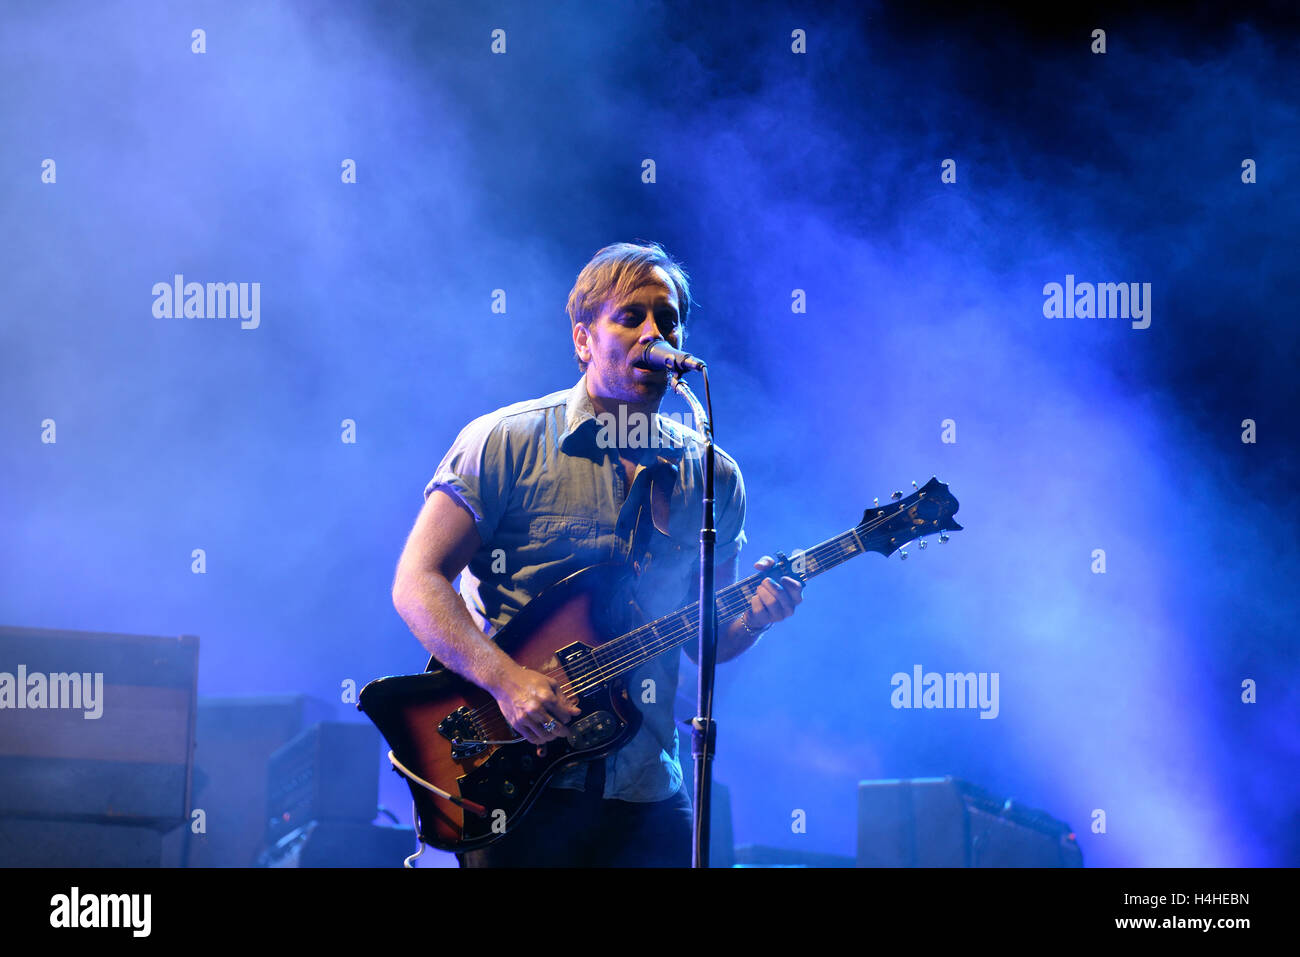 BARCELONA - MAY 28: The Black Keys (rock band) performs at Primavera Sound 2015 Festival on May 28, 2015 in Barcelona, Spain. Stock Photo